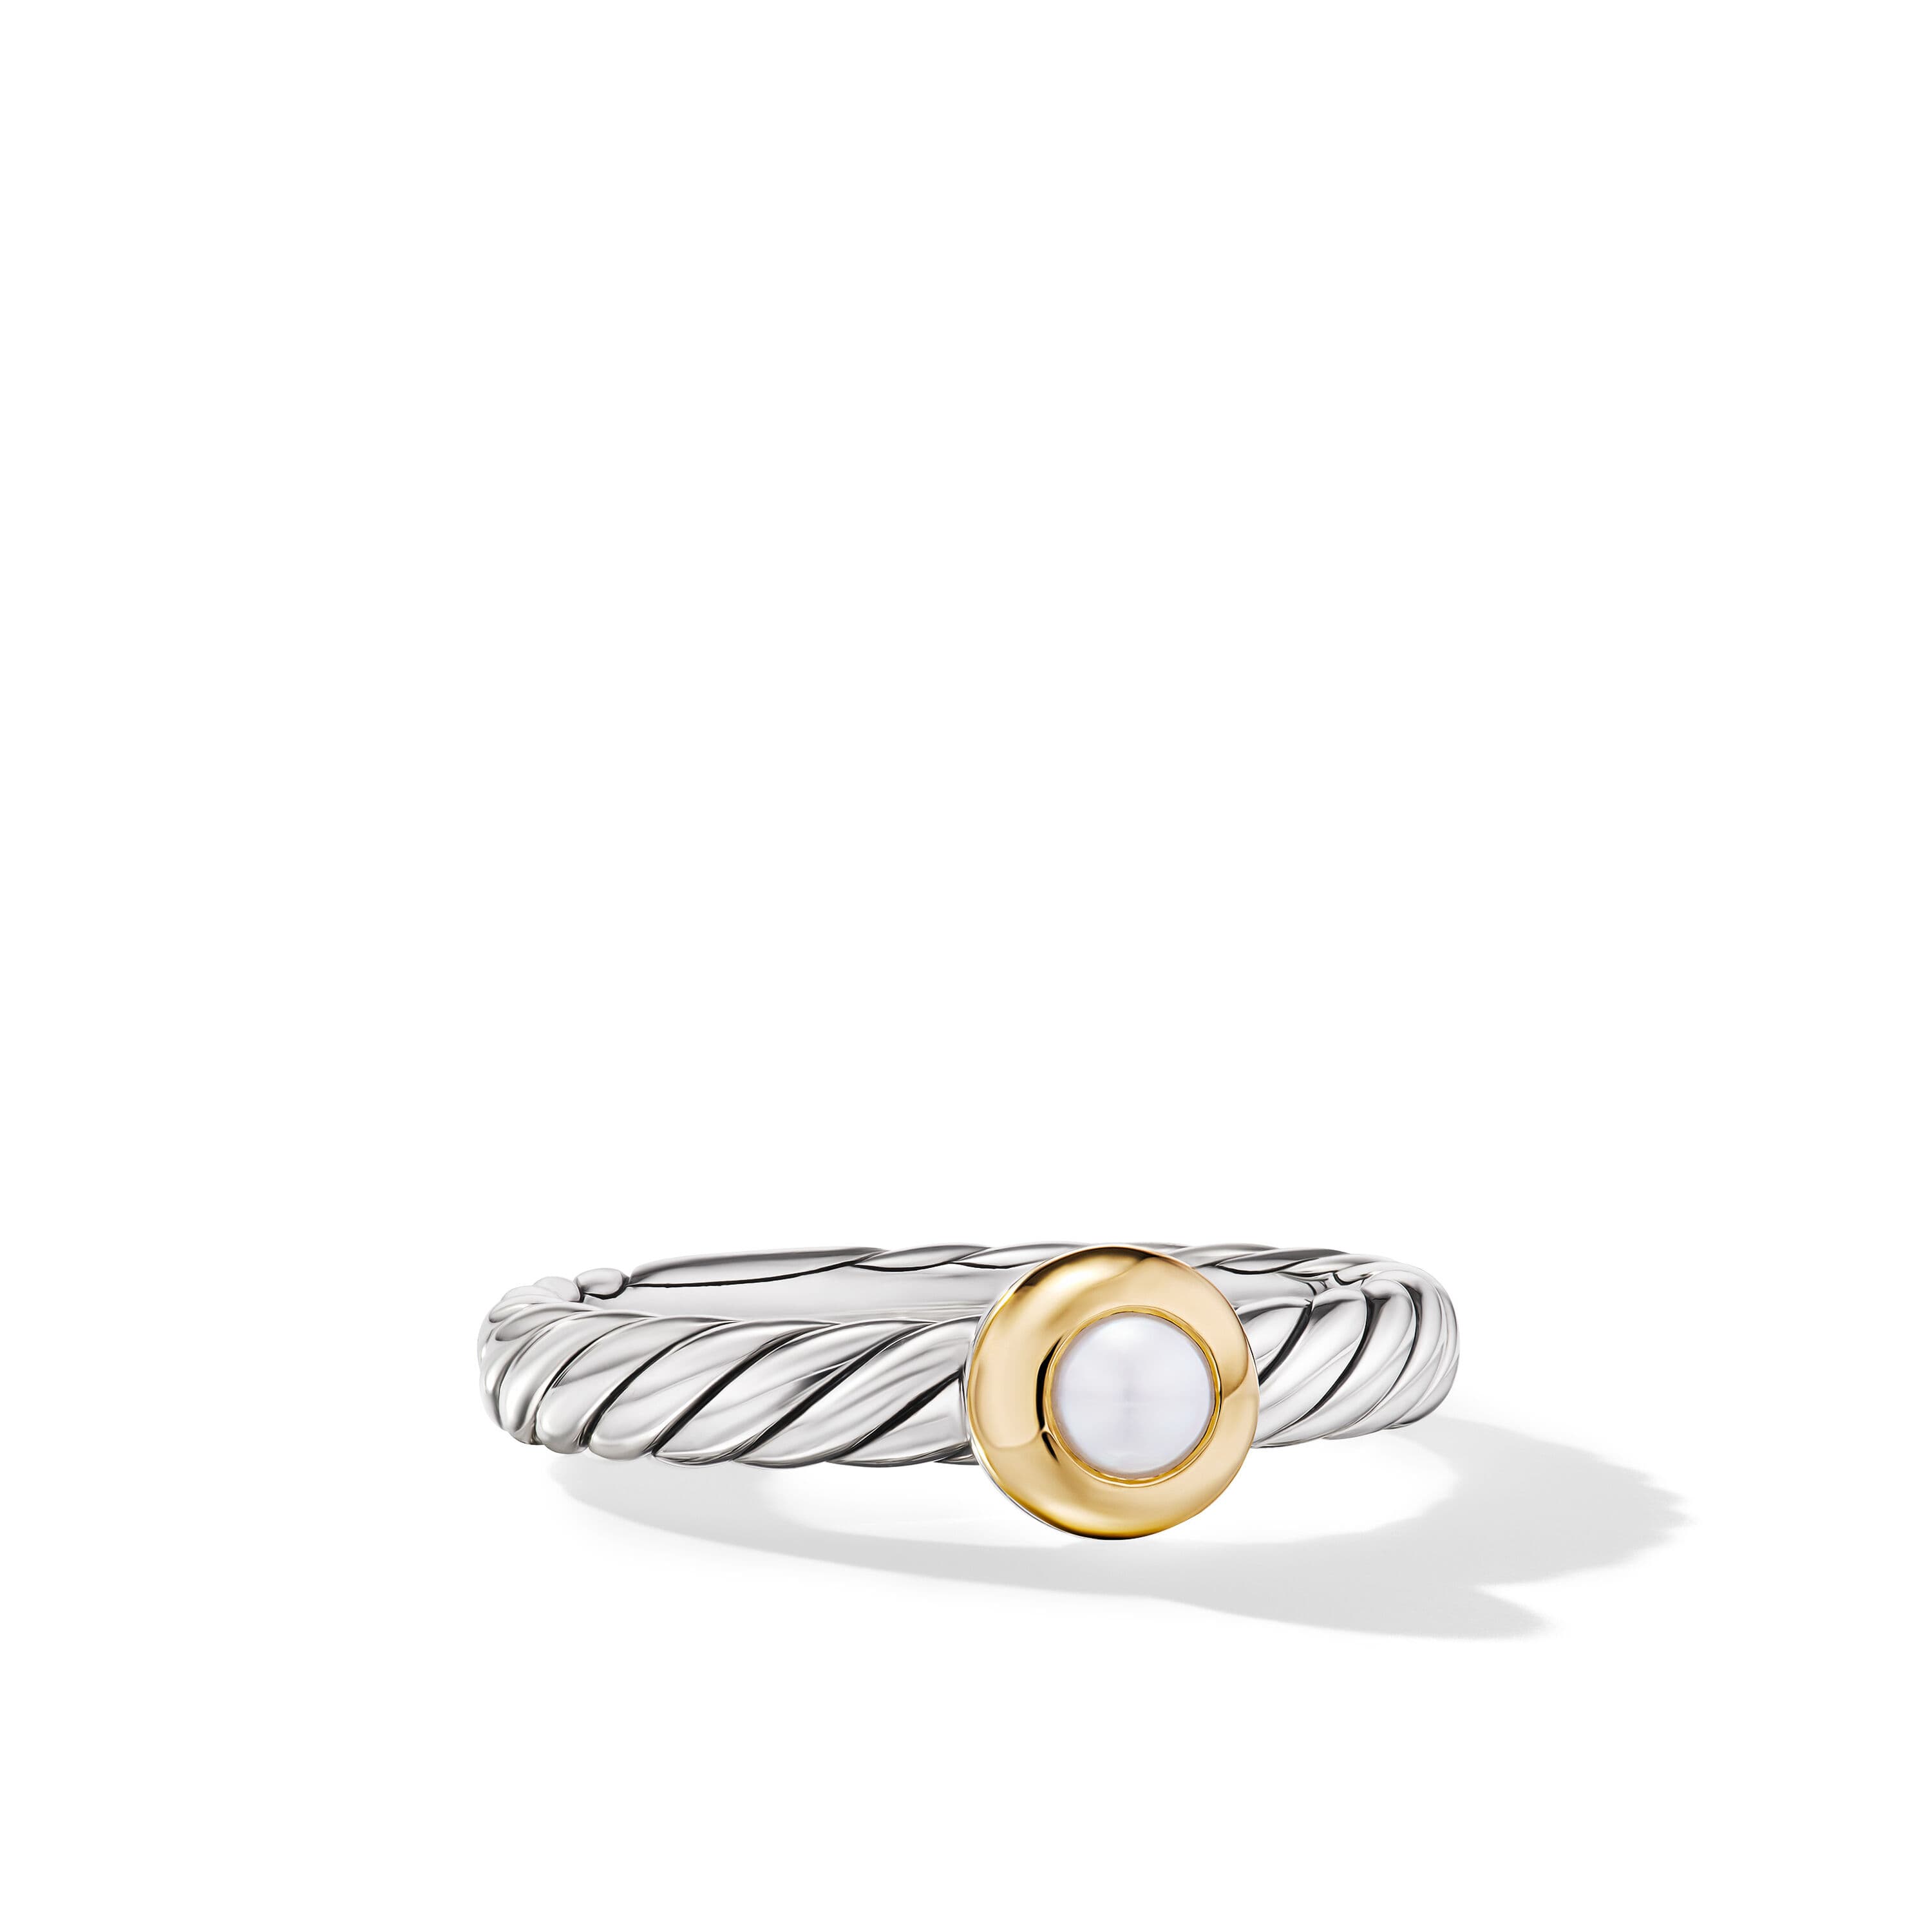 David Yurman Petite Cable Ring in Sterling Silver with 14K Yellow Gold and Pearl, Size 7